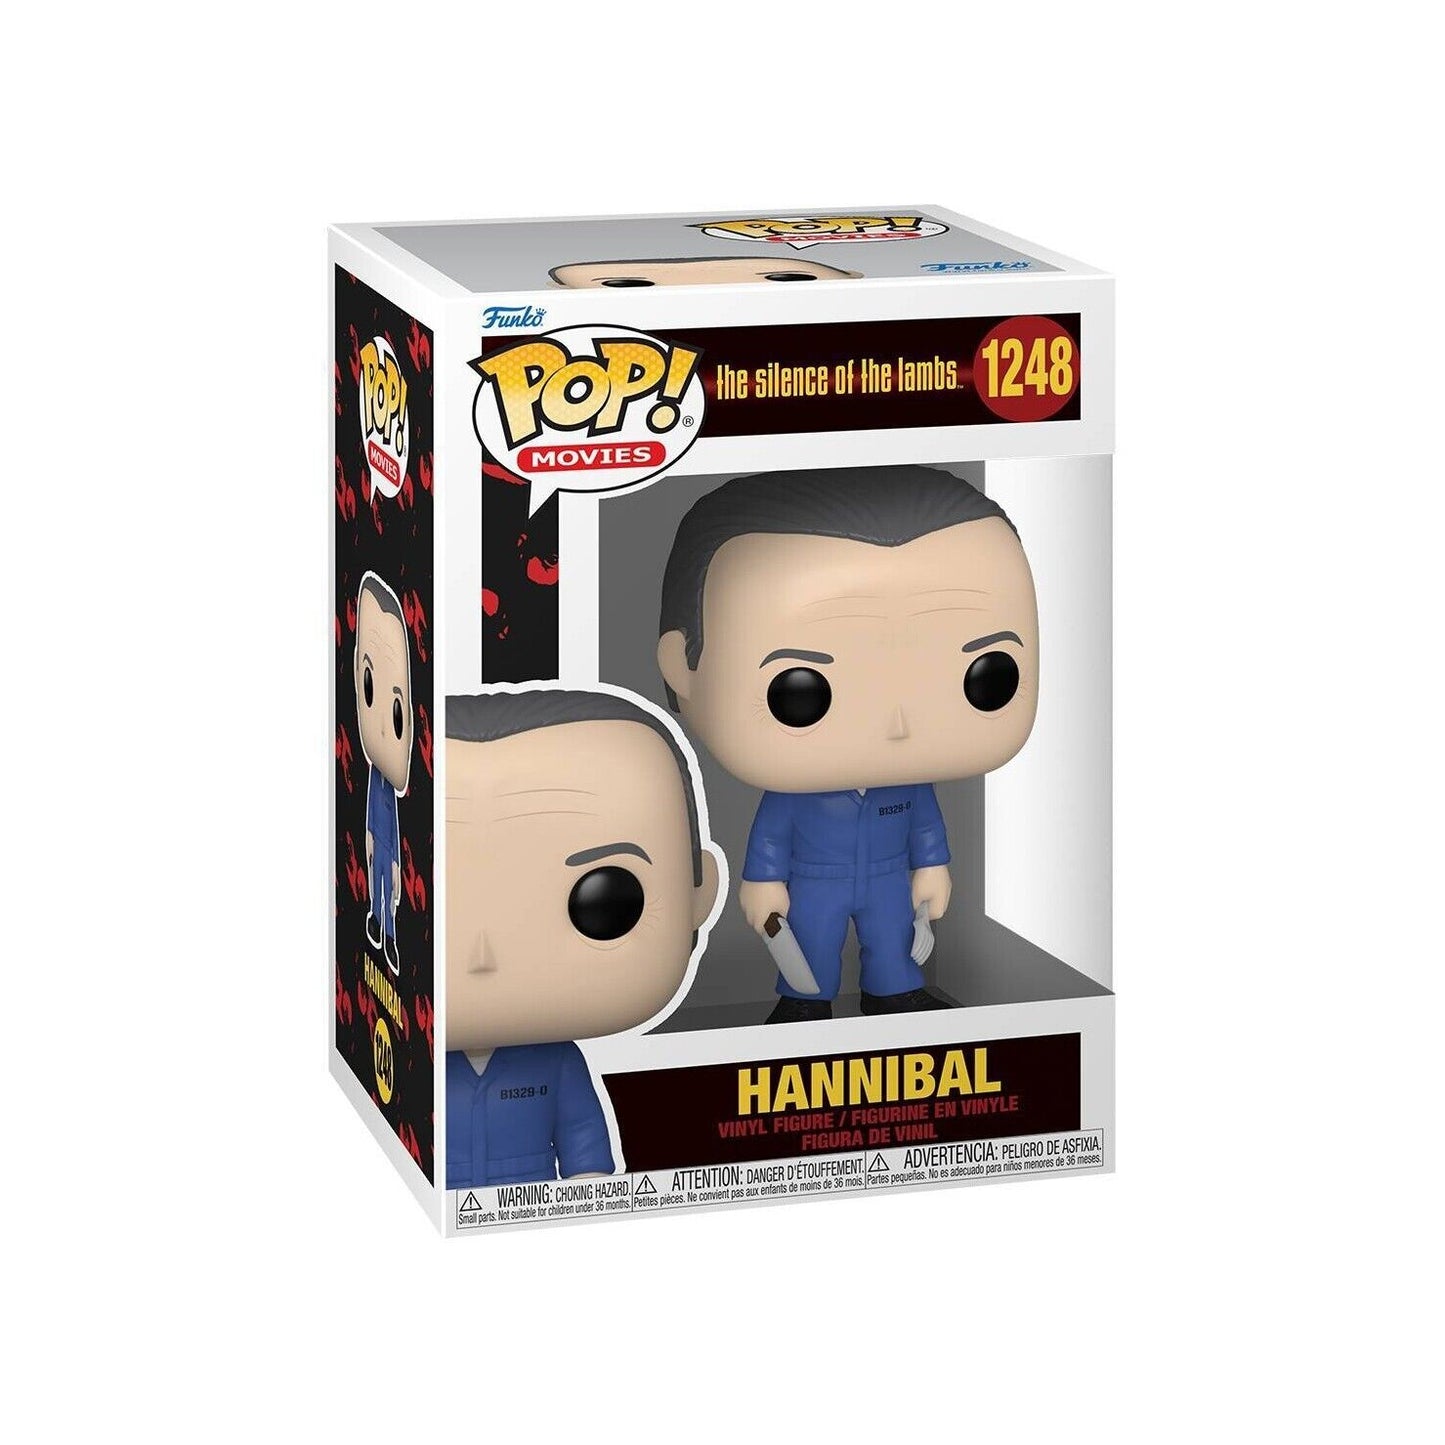 Funko Pop - The Silence of the lambs - Hannibal